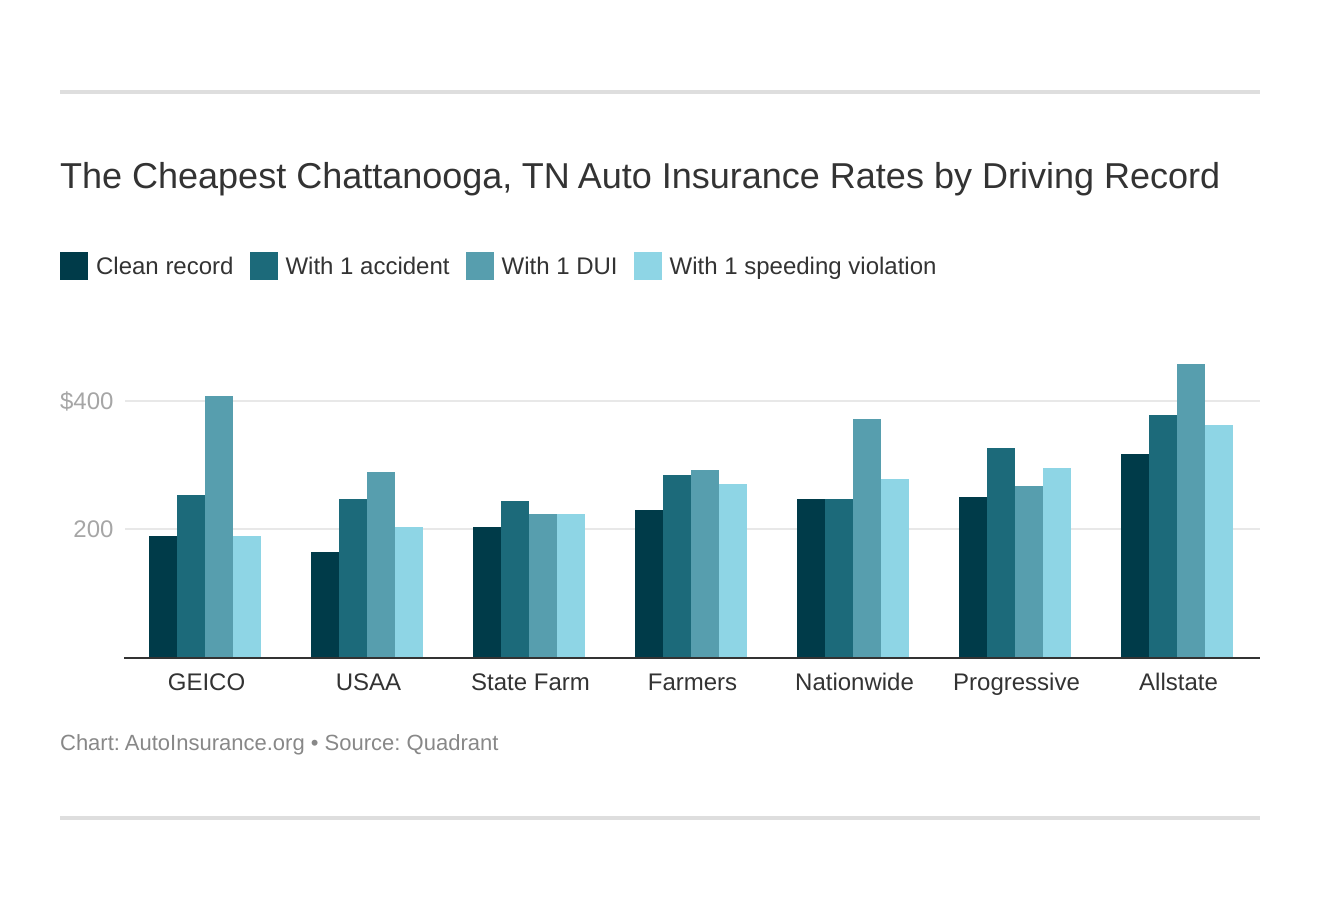 The Cheapest Chattanooga, TN Auto Insurance Rates by Driving Record